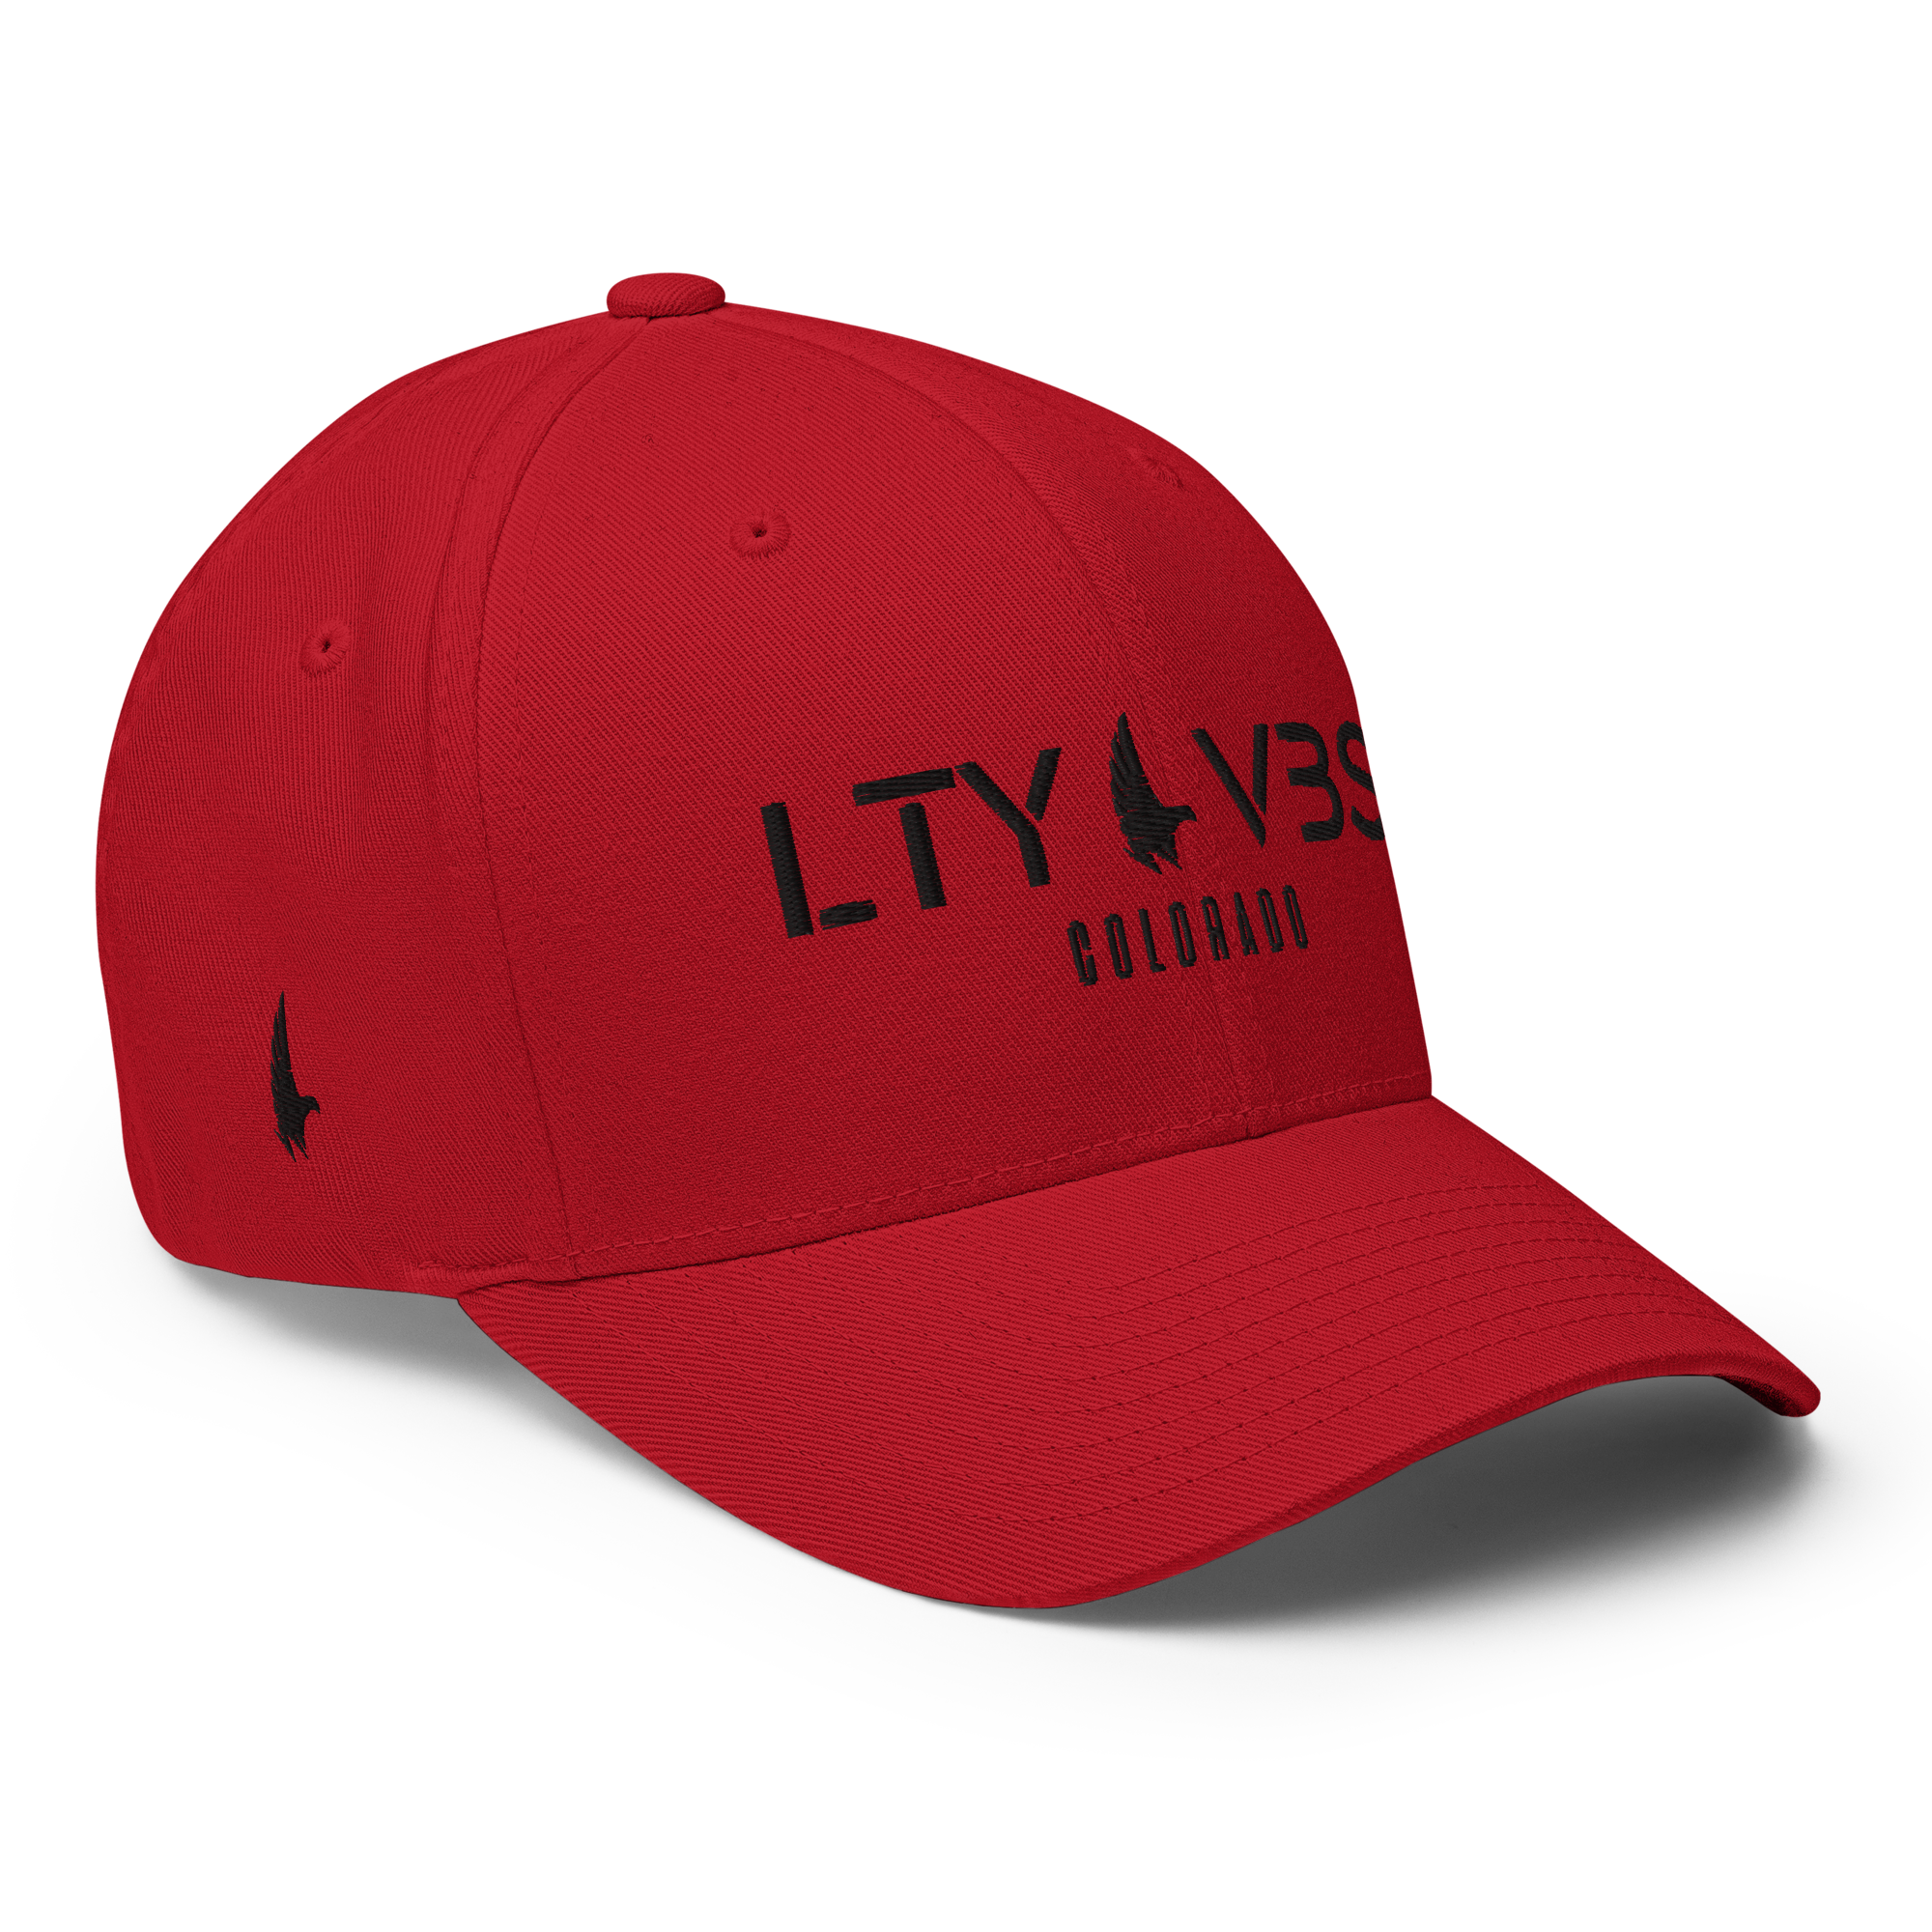 Loyalty Era Colorado Fitted Hat Red / Black Fitted - Loyalty Vibes